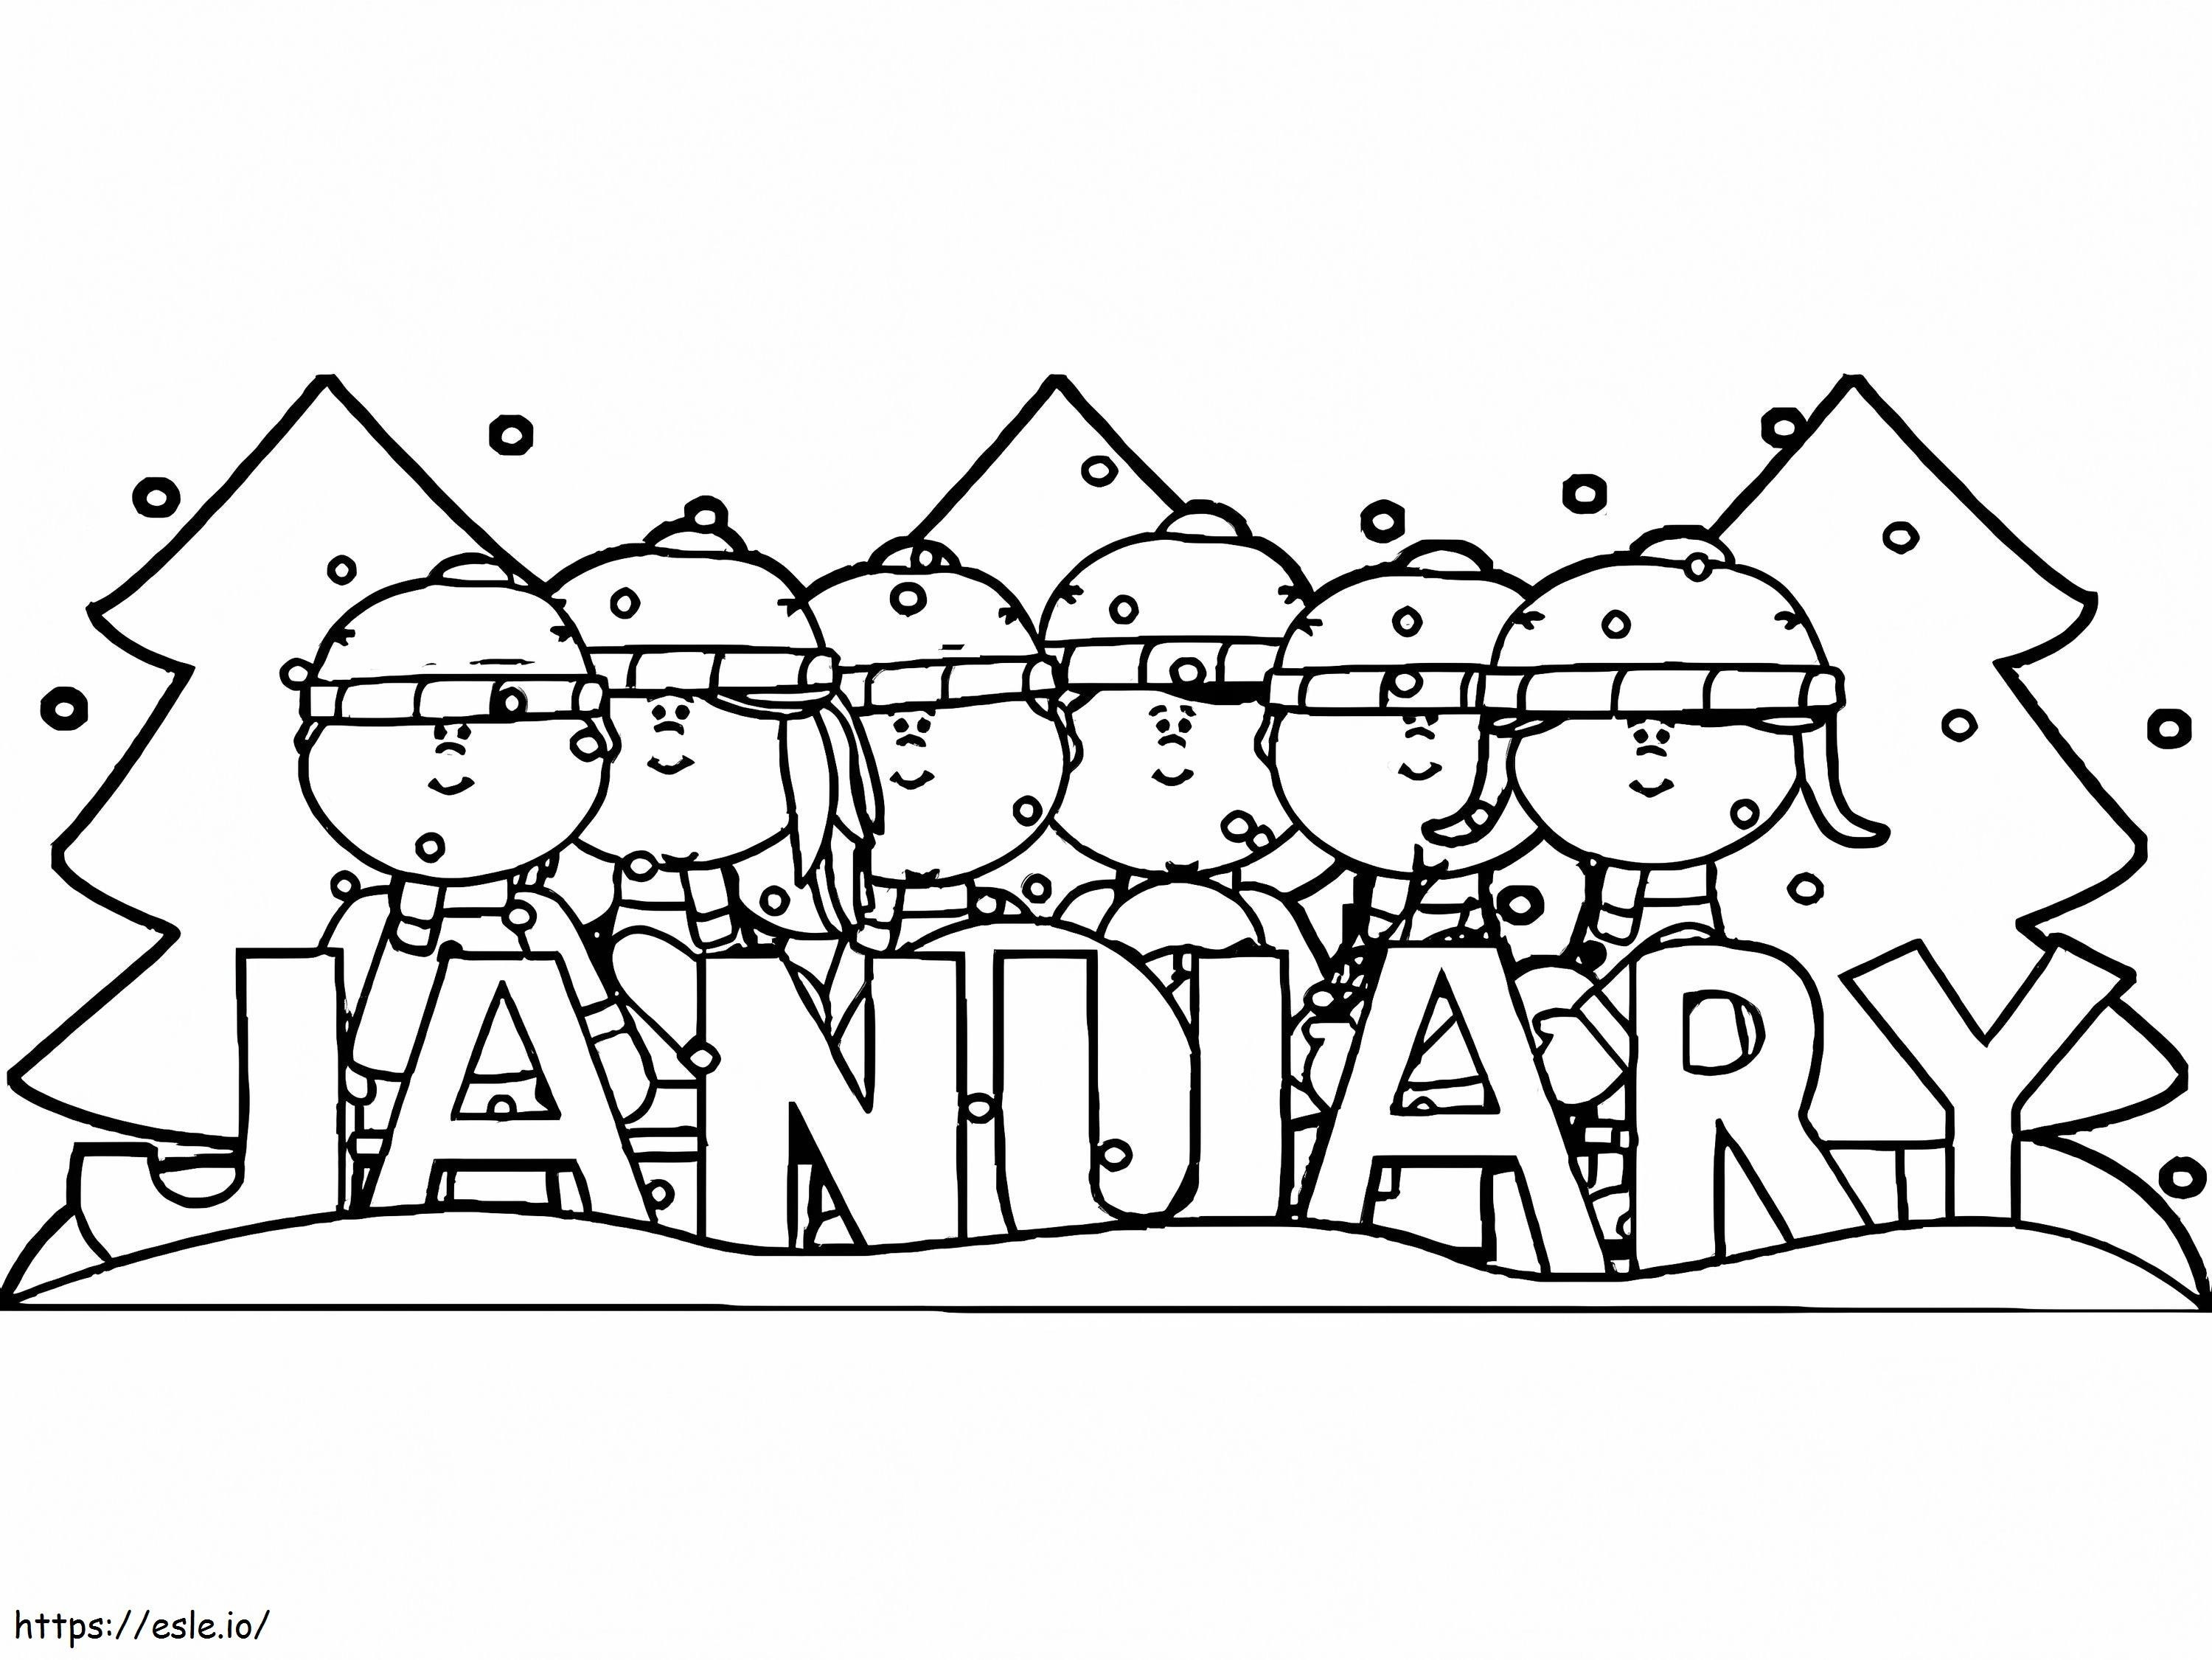 Children January coloring page